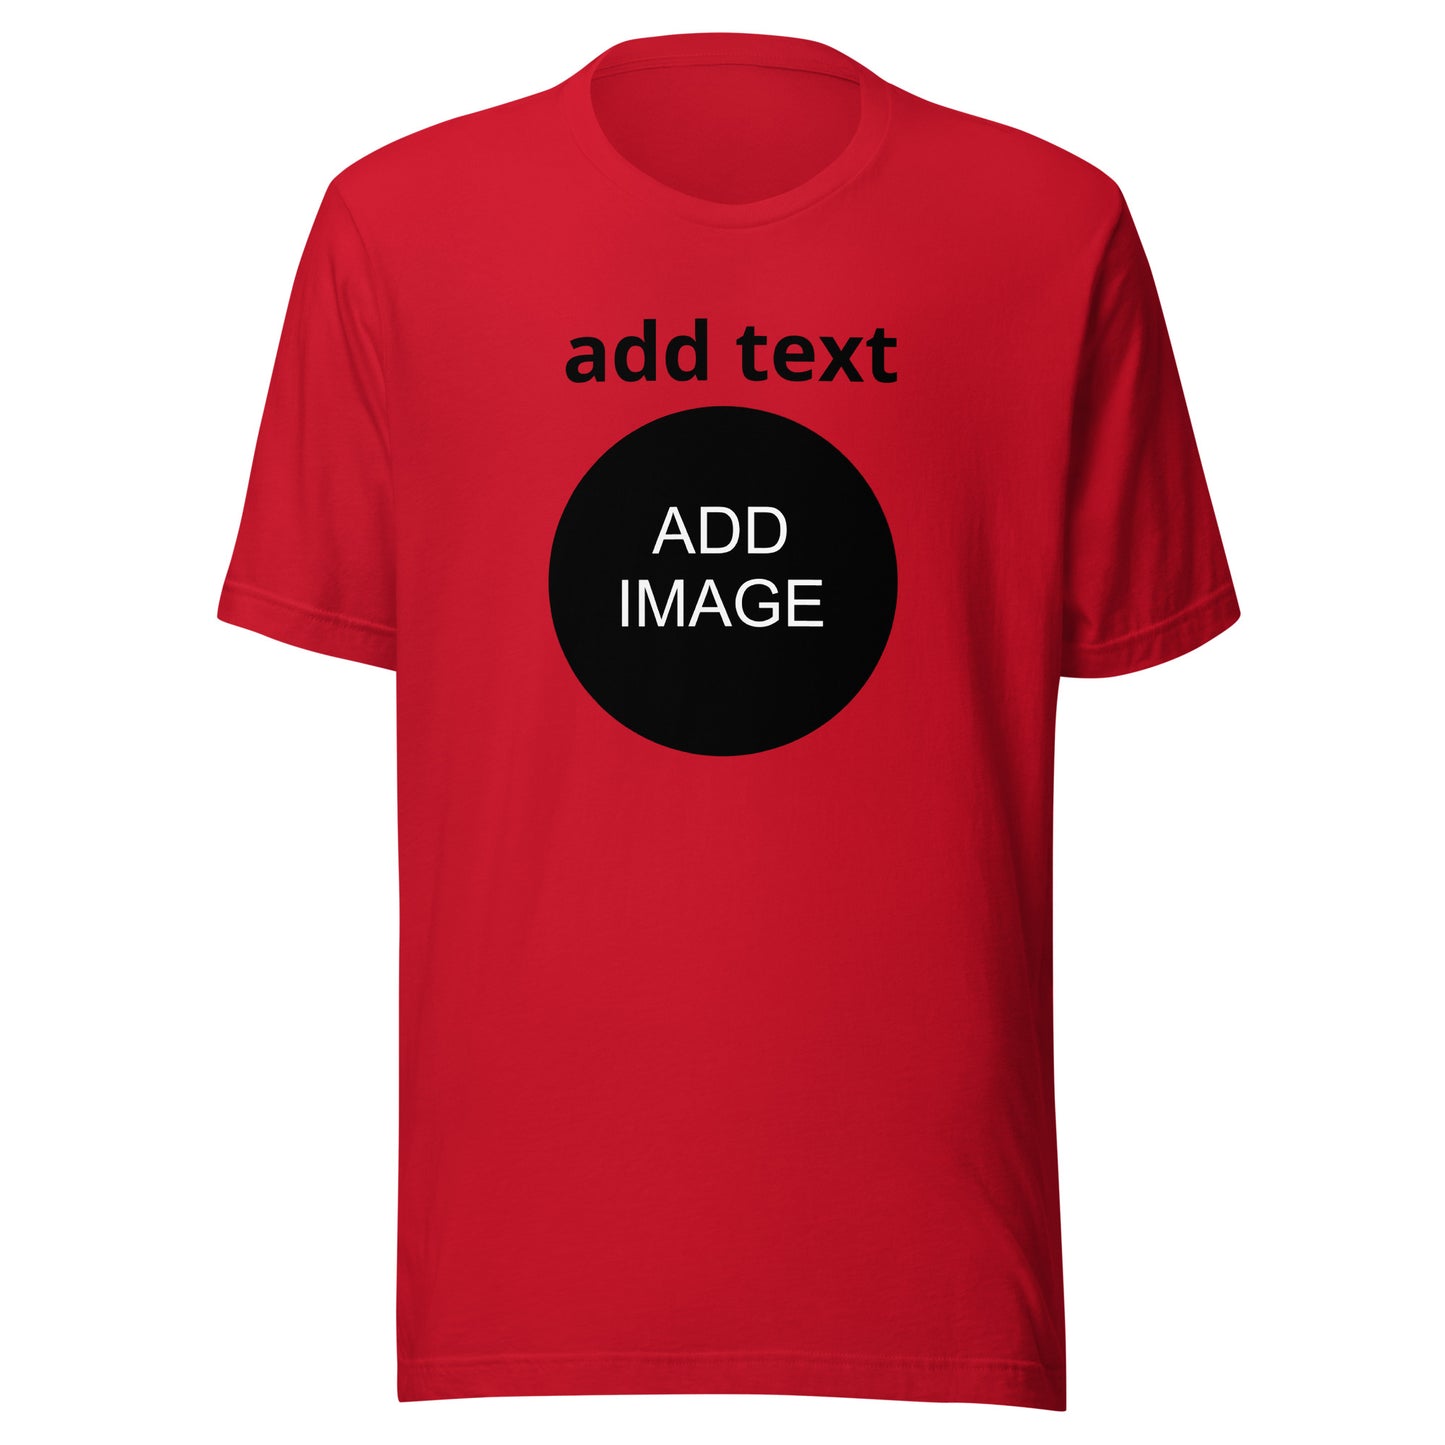 Small - Medium Unisex [front image and front black text]